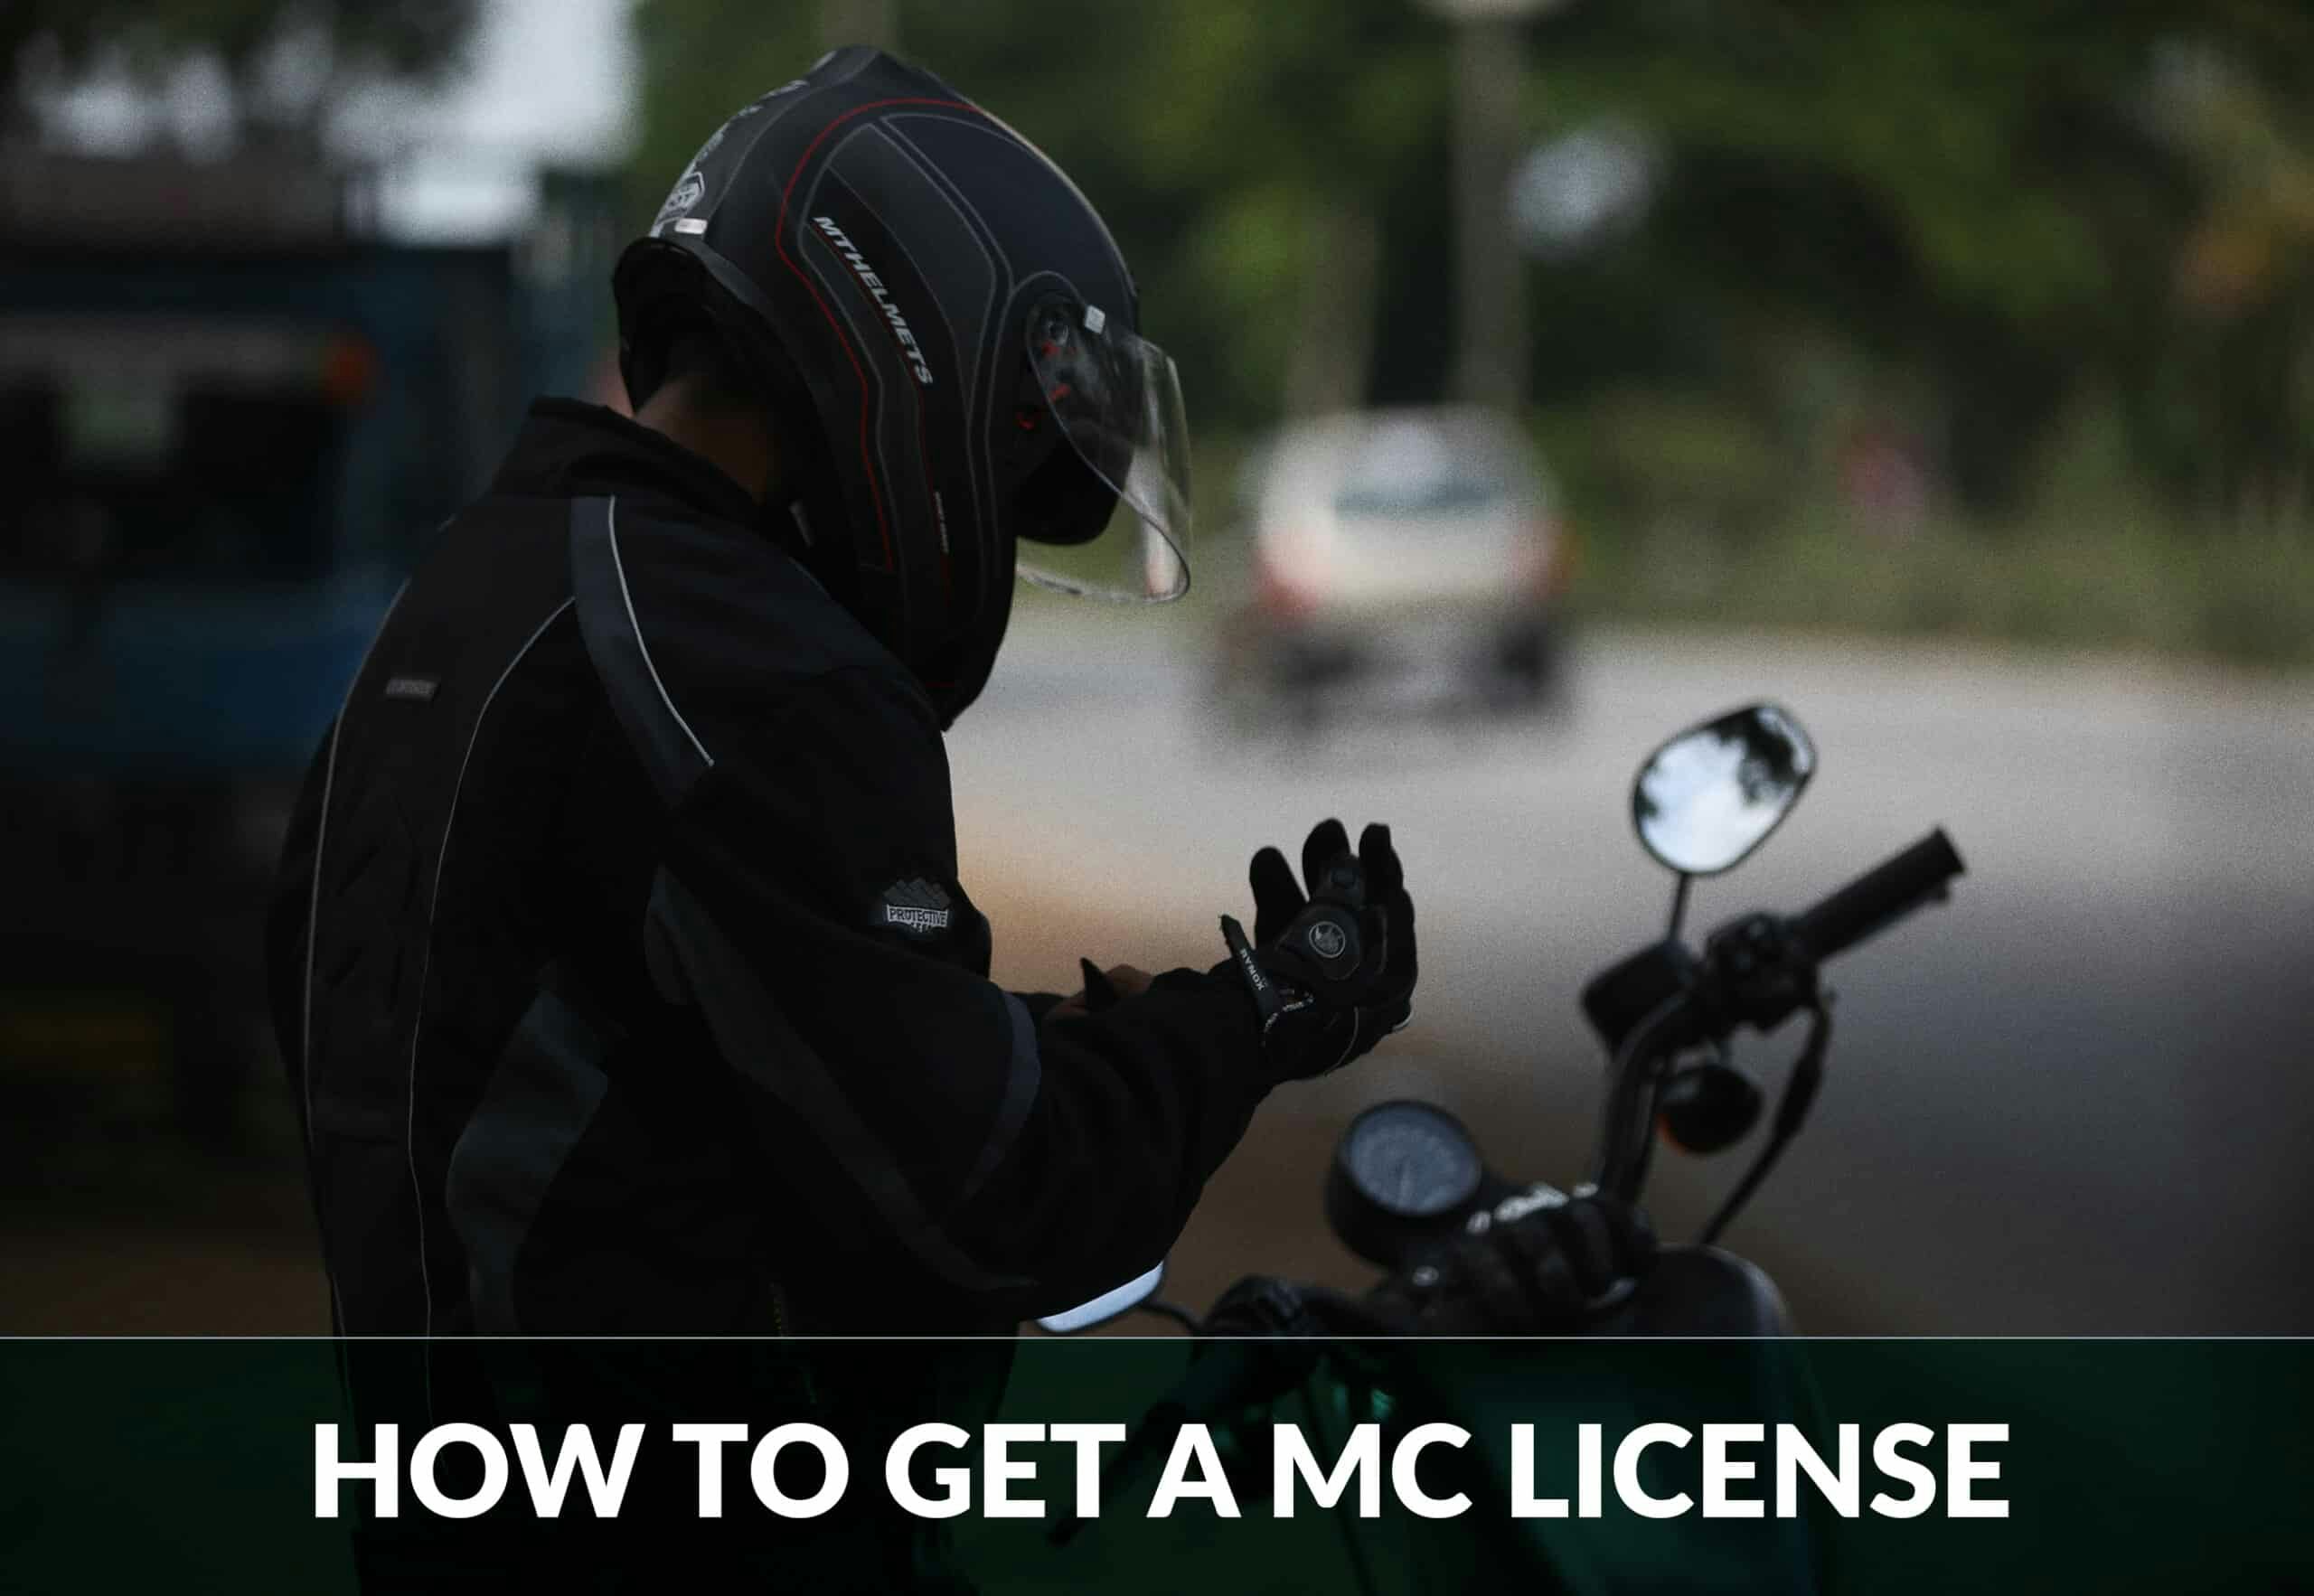 HOW TO GET A MC LICENSE